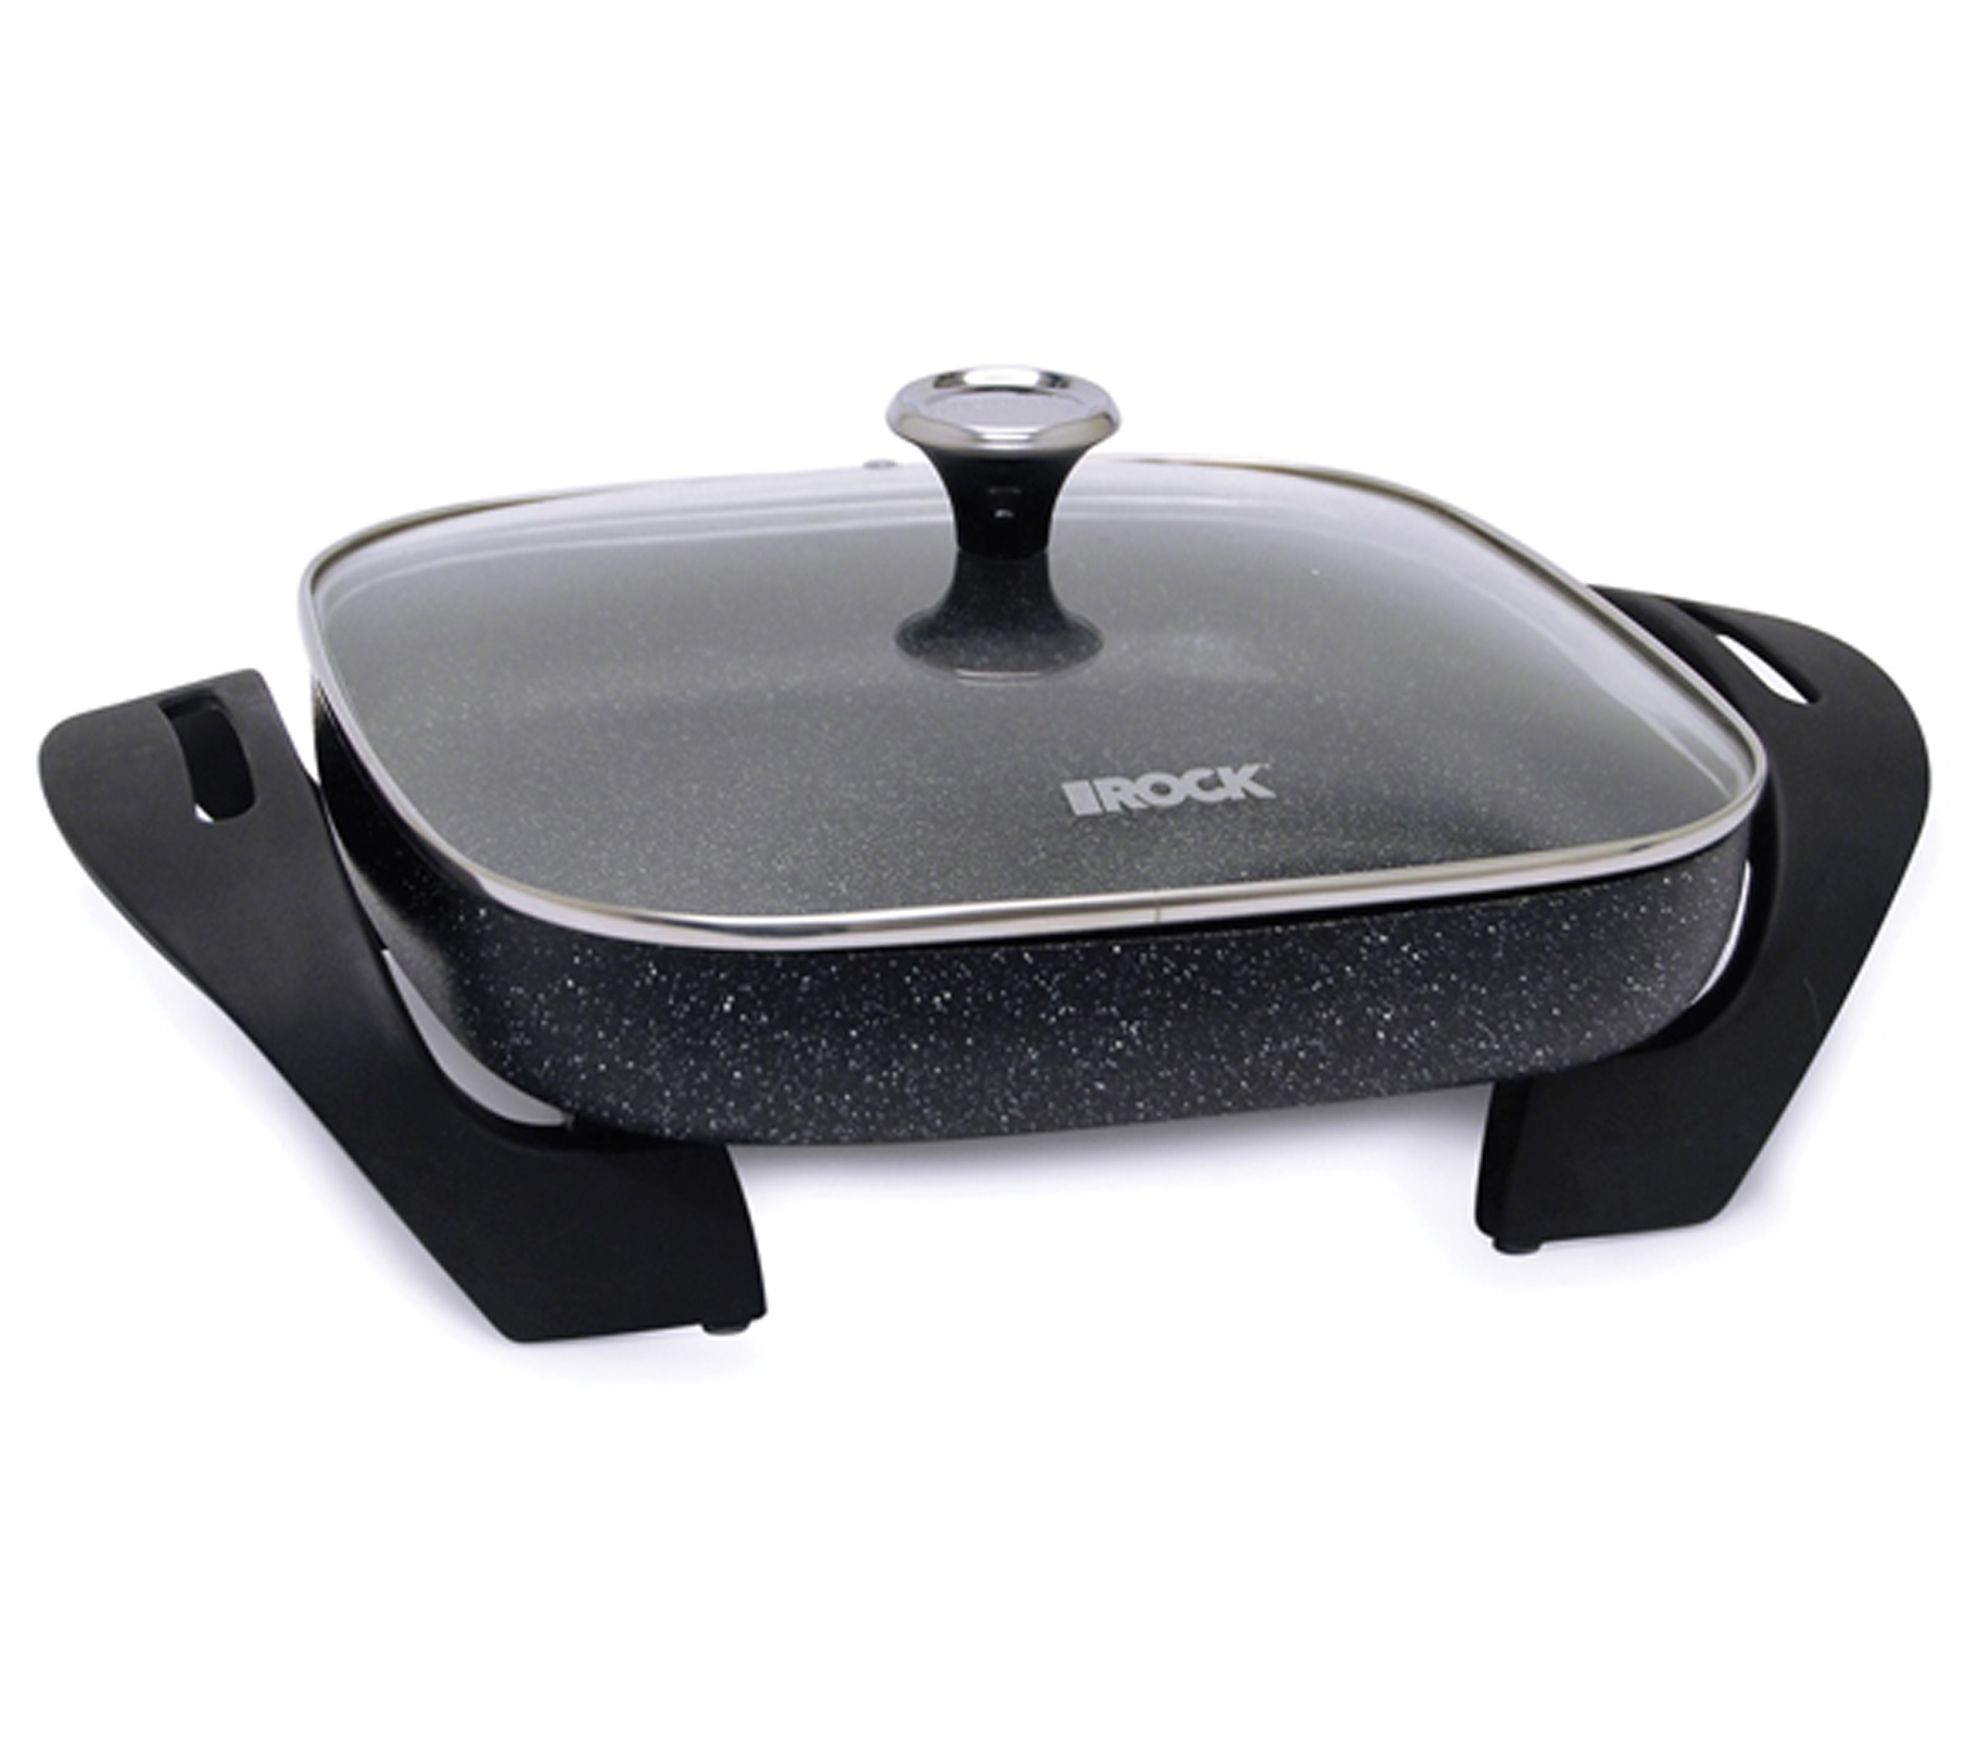 HomeCraft 7-Inch Electric Non-Stick Skillet — Nostalgia Products